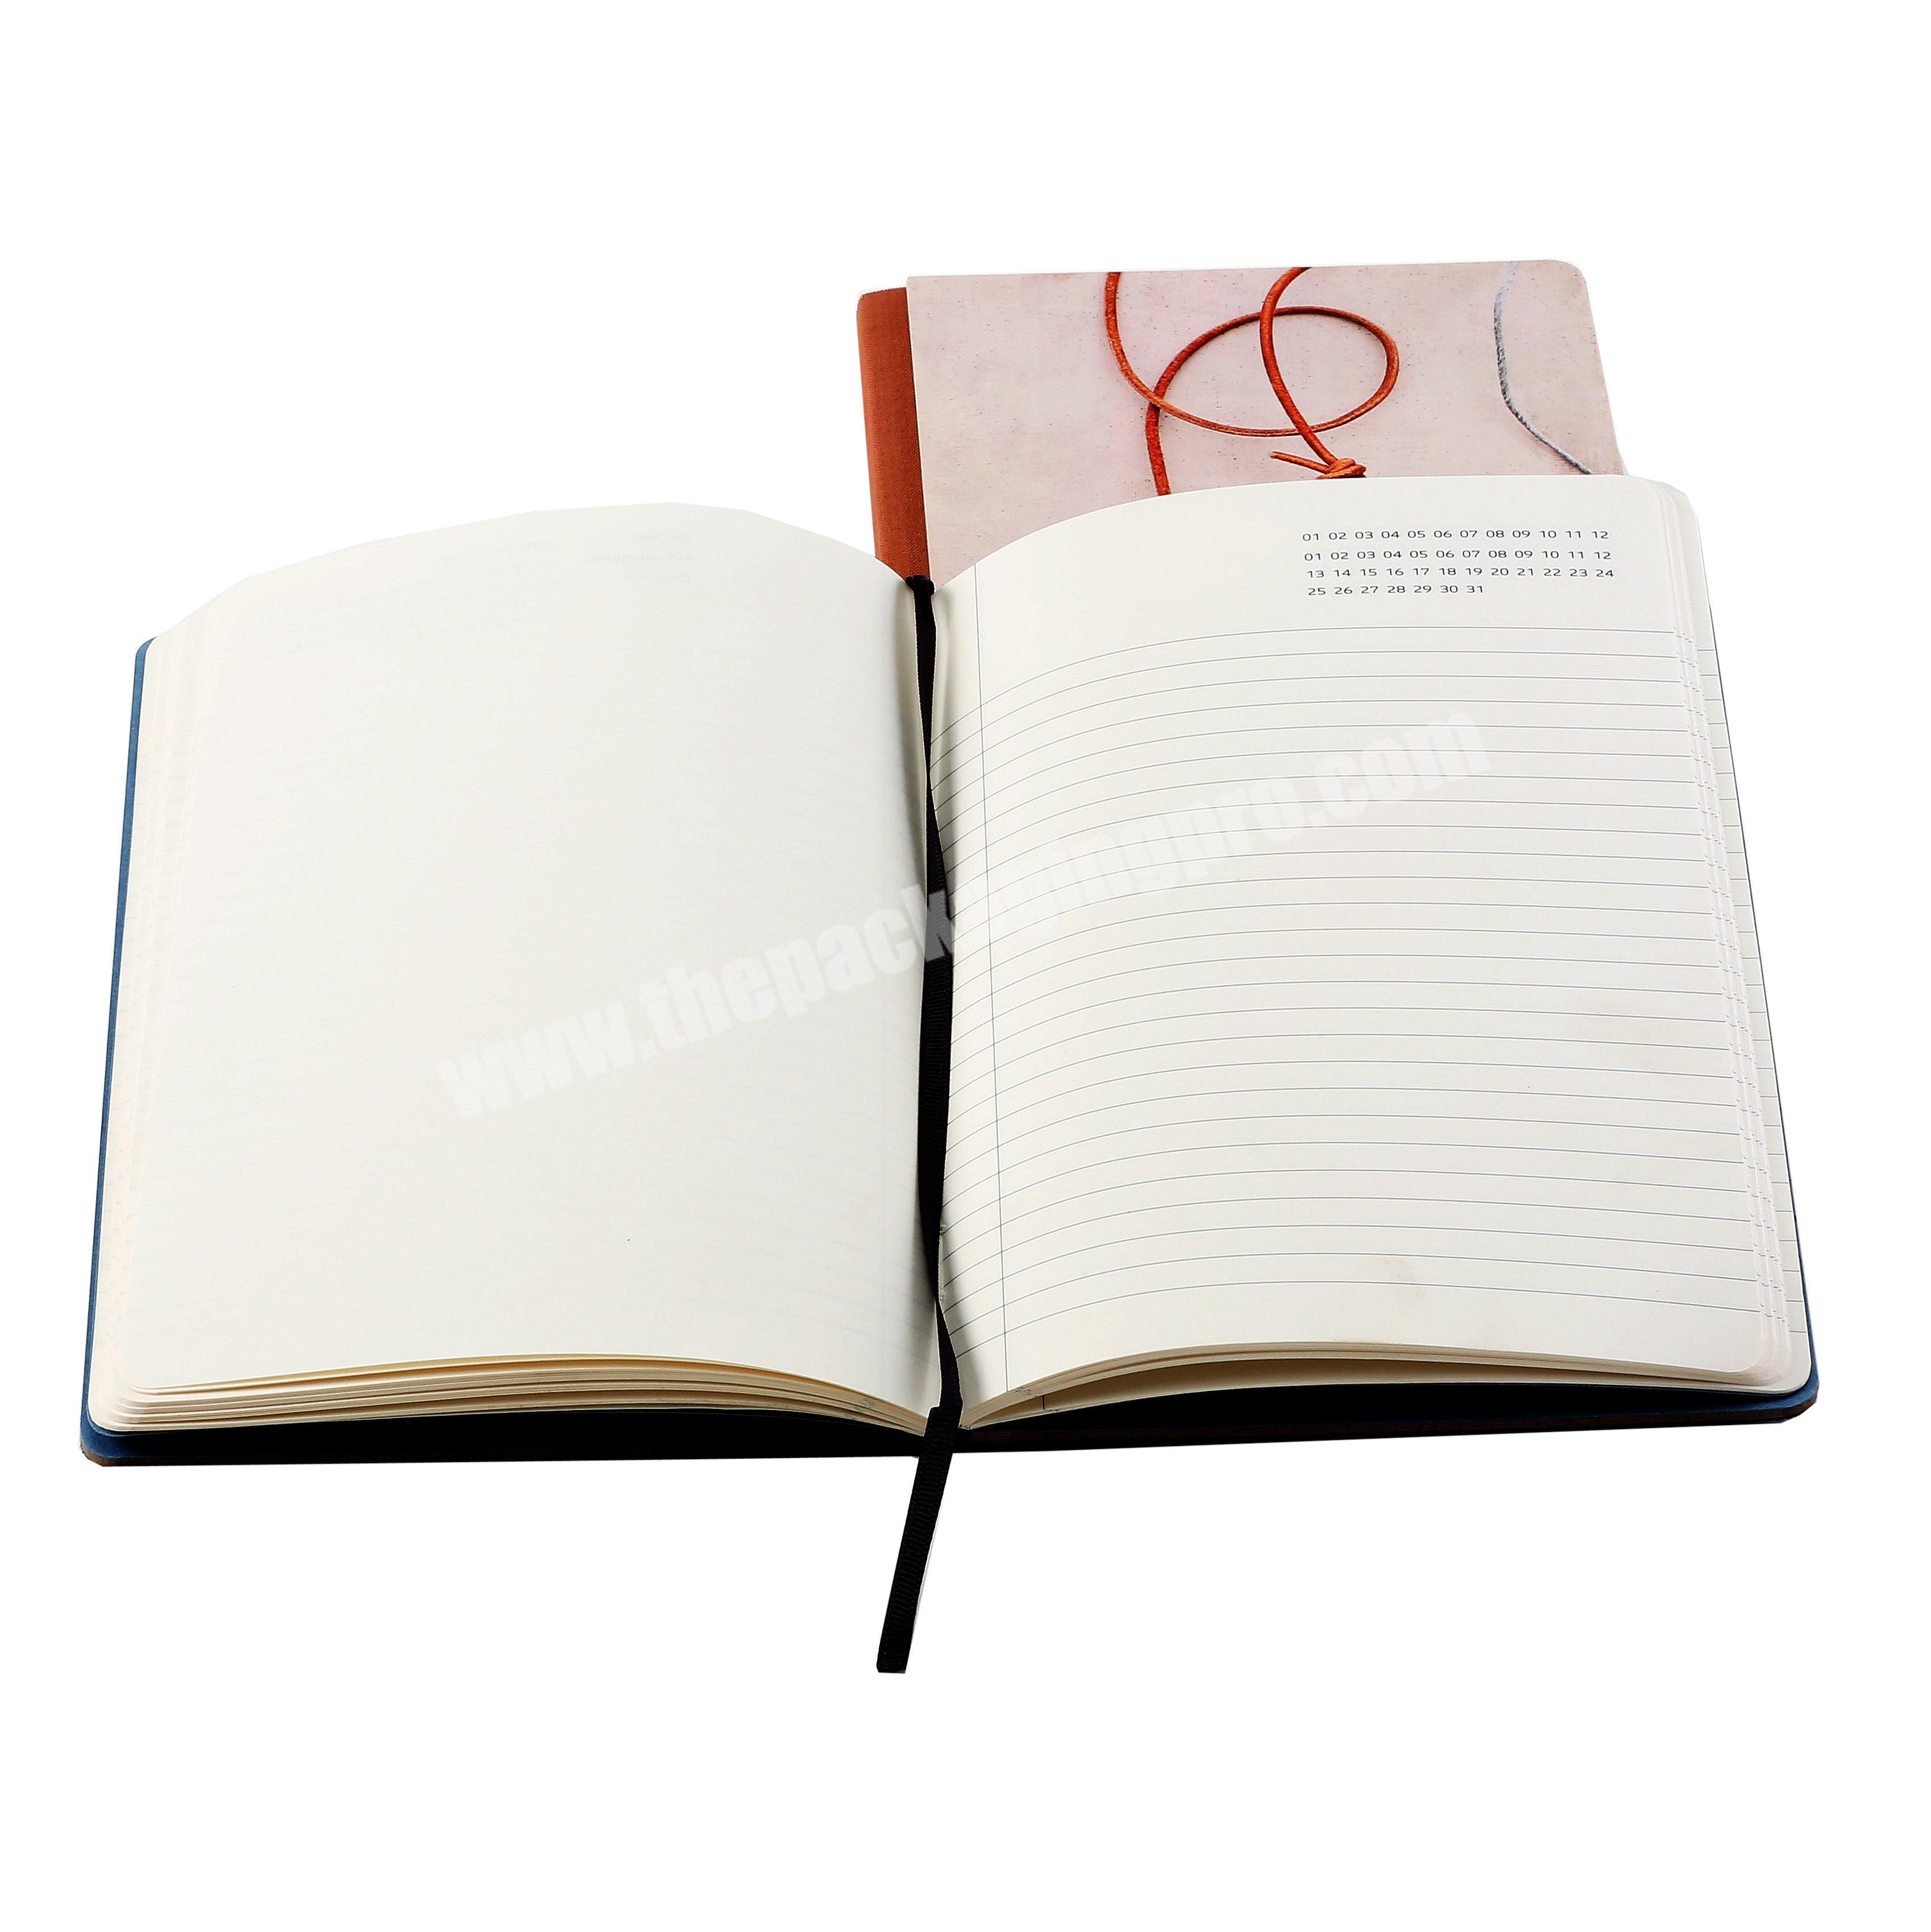 Printed paper made diary notebook with lock